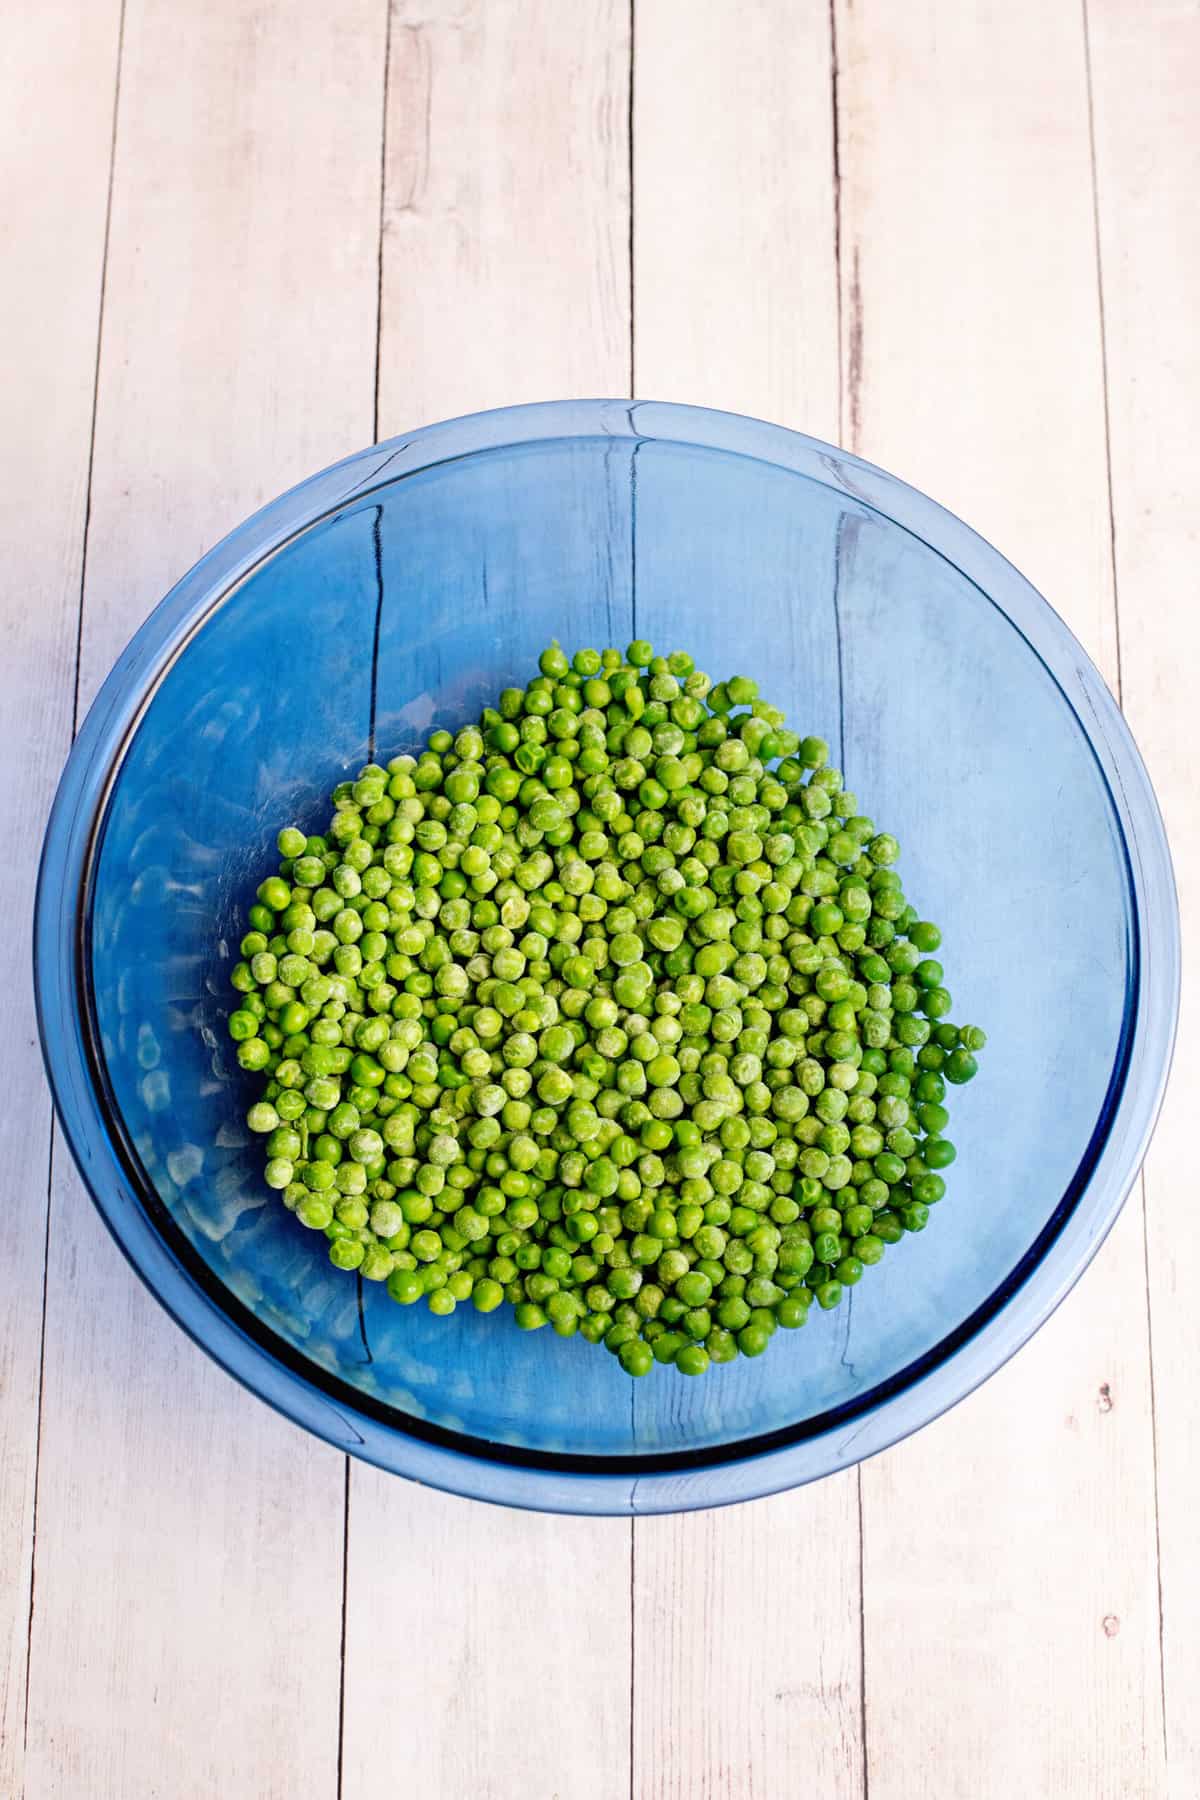 pour peas in the bowl